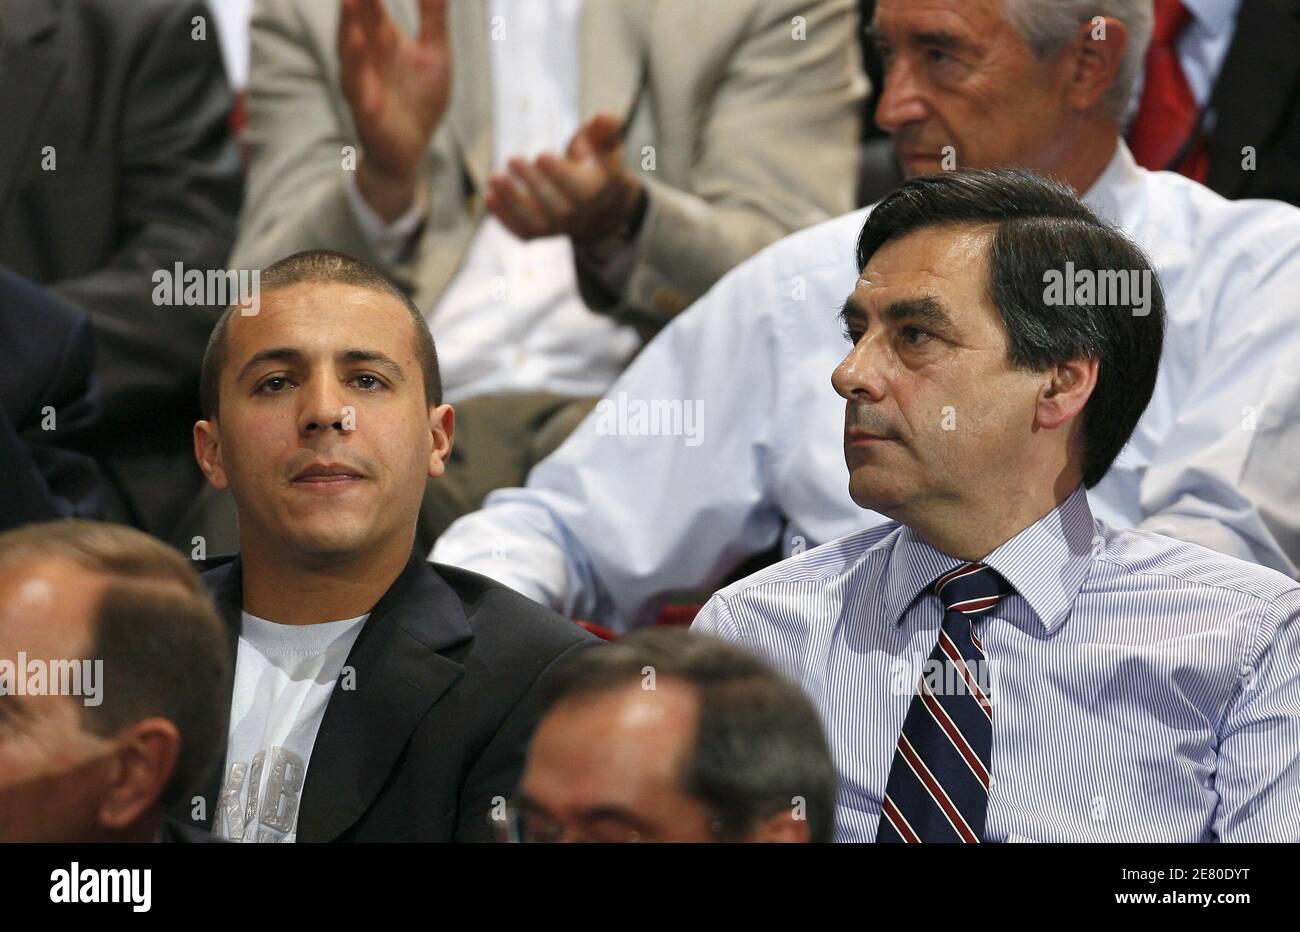 'Singer Faudel and Francois Fillon are seen listening to Presidential frontrunner Nicolas Sarkozy adressing tens of thousands of supporters at Paris Bercy concert hall in Paris, France, April 29, 2007. Sarkozy went on the offensive Sunday, charging that he had been unjustly depicted as authoritarian as the battle for the Elysee entered its final week. The rightwinger said he had suffered ''personal attacks'' during the campaign that had targeted his ''honour, sincerity, personality and character.'' Photo By Bisson-Taamallah-Orban/ABACAPRESS.COM' Stock Photo